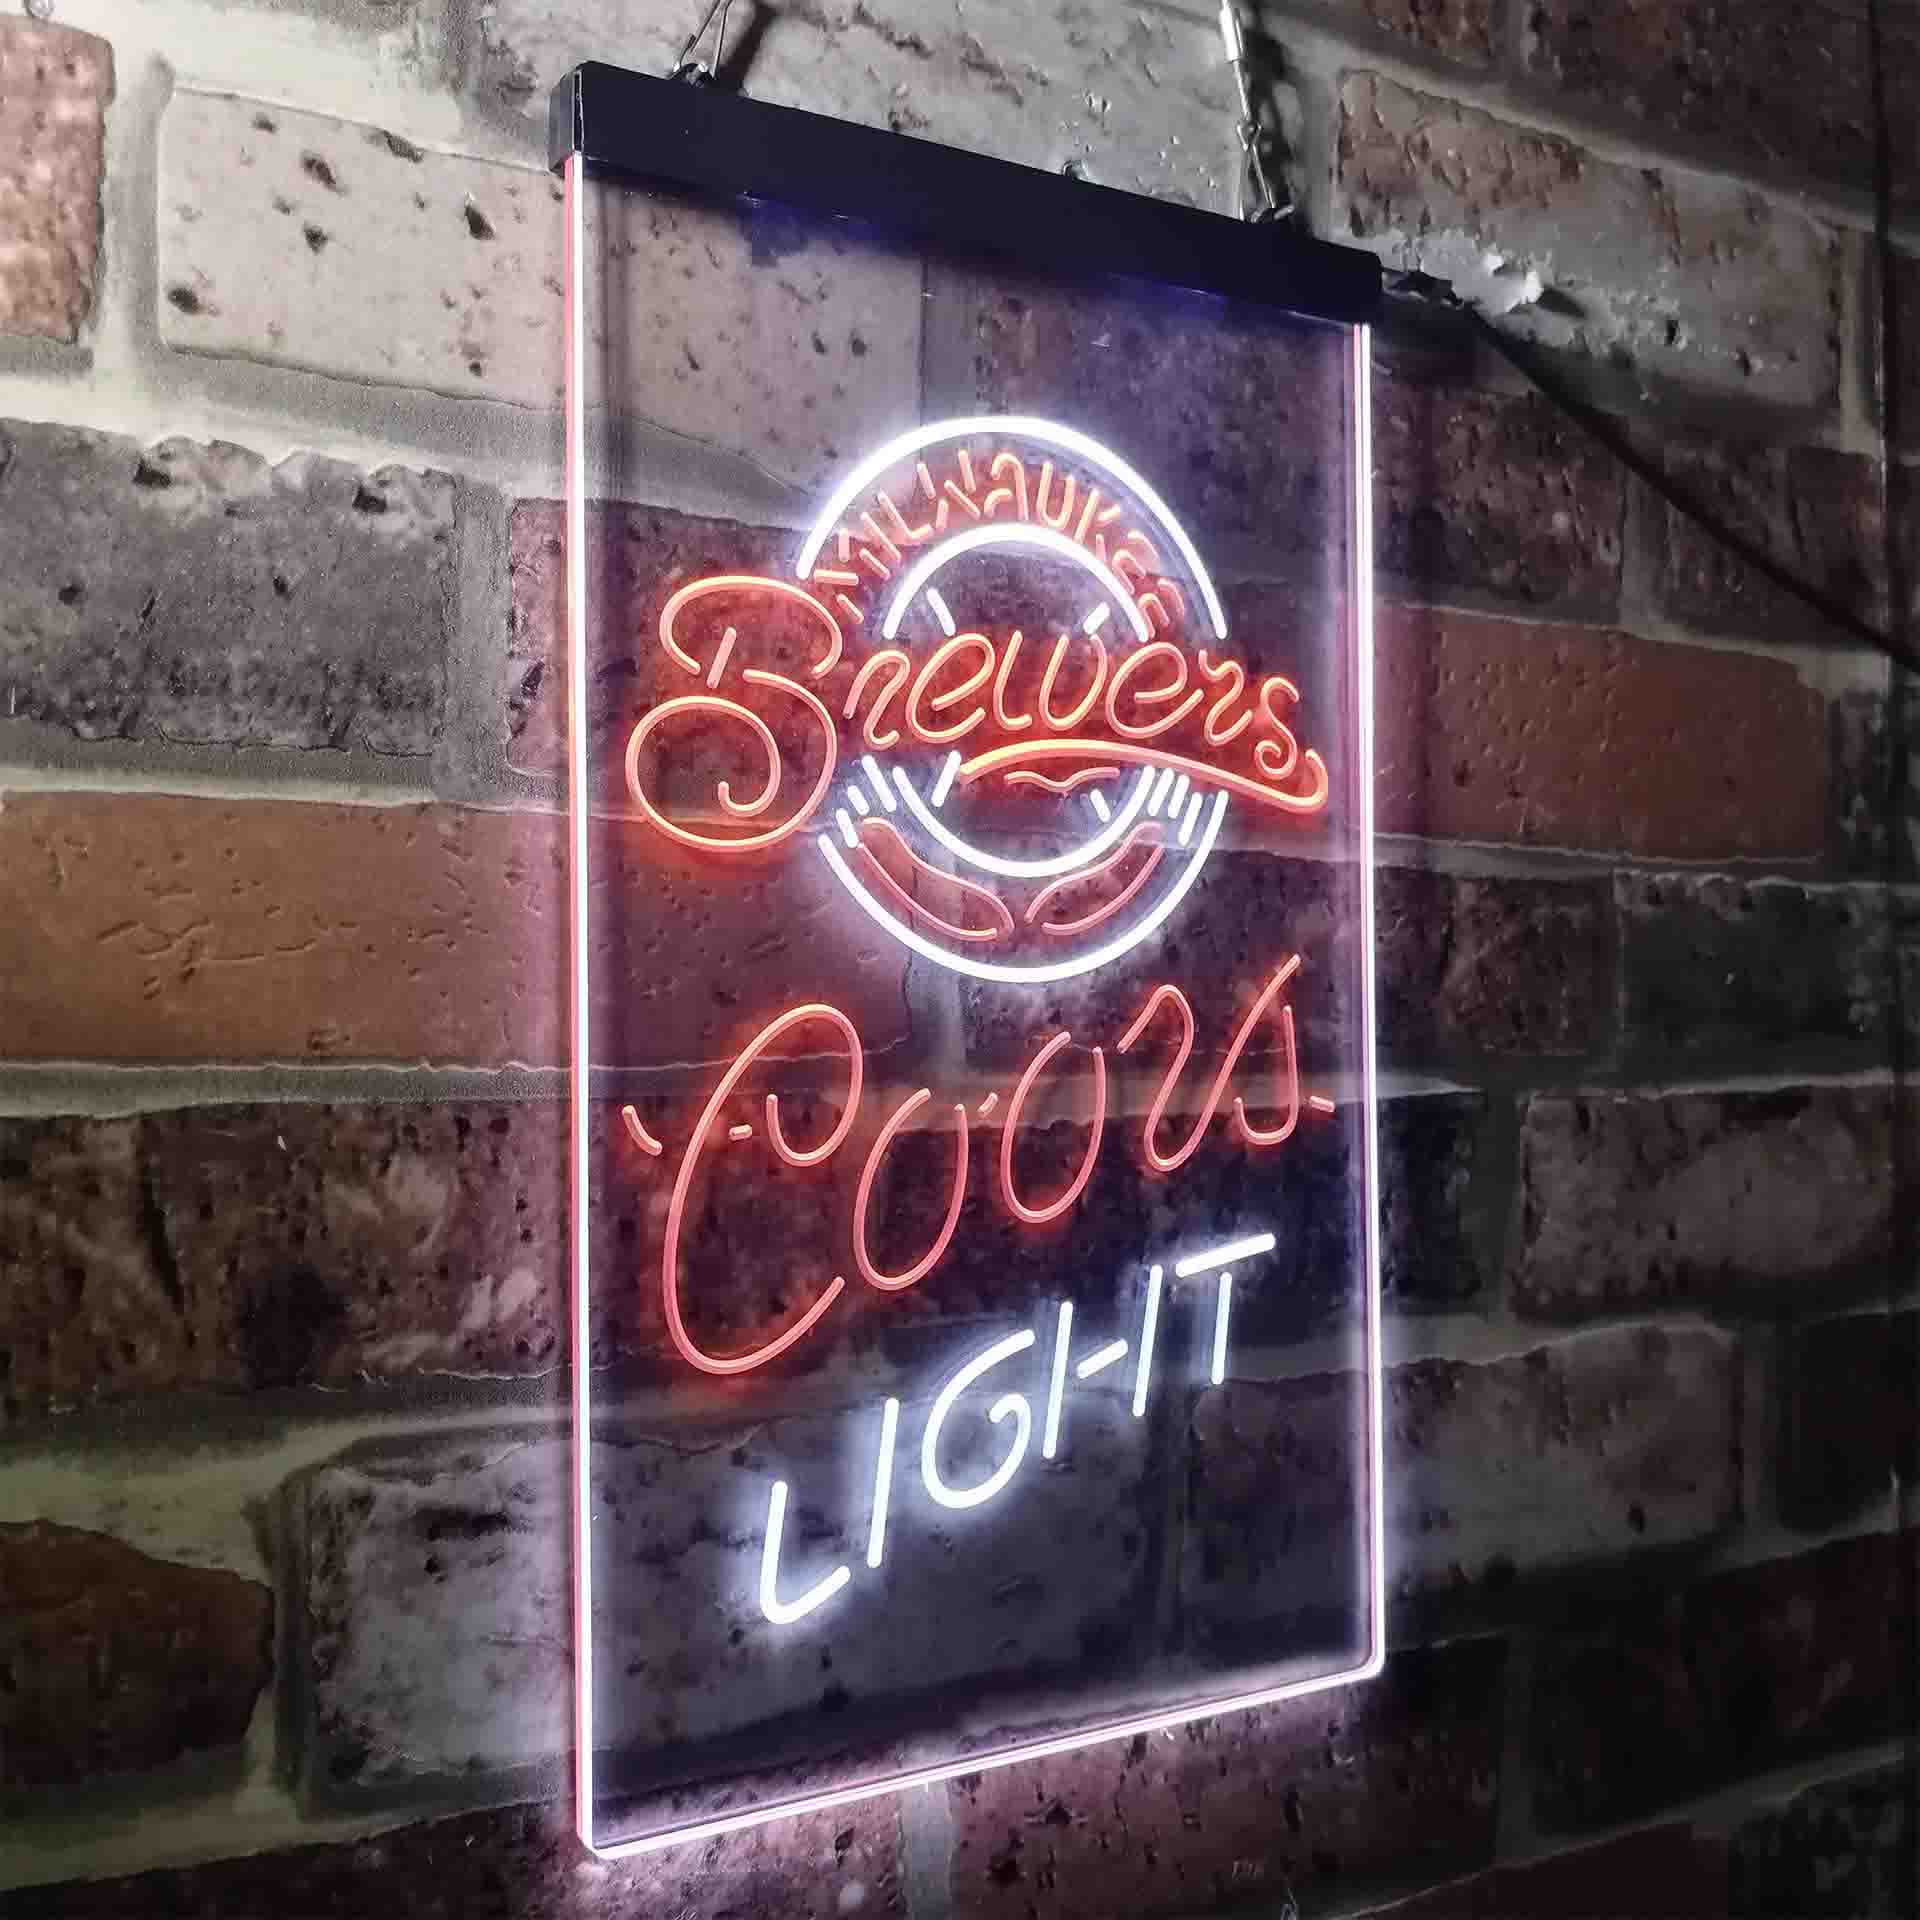 Milwaukee Brewers Coors Light Neon-Like LED Sign